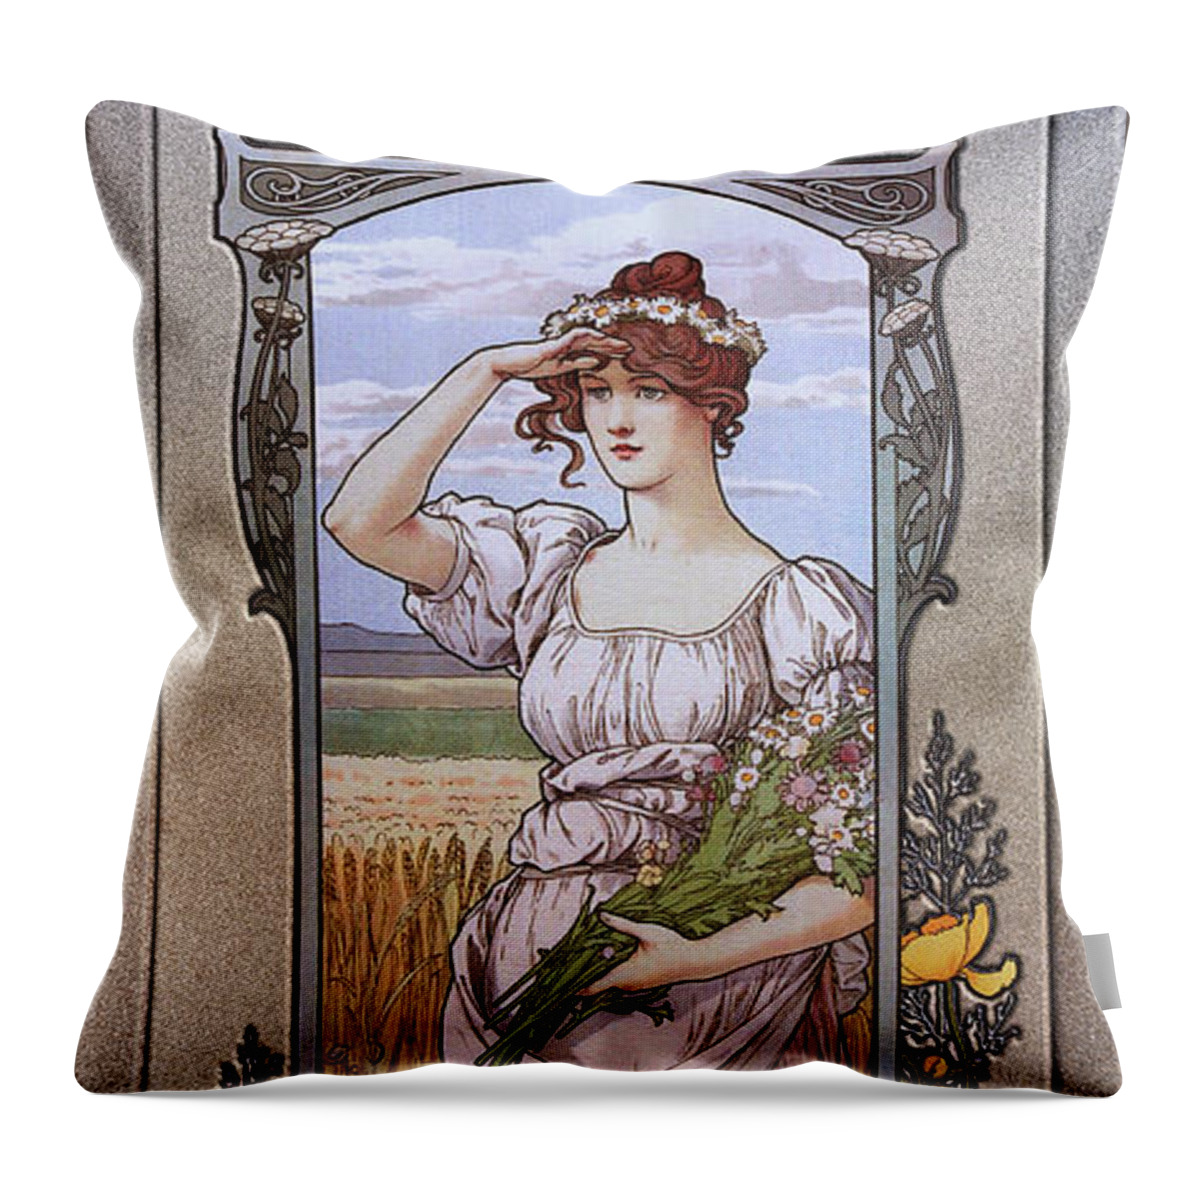 Wildflowers Throw Pillow featuring the painting Wildflowers by Elisabeth Sonrel by Rolando Burbon